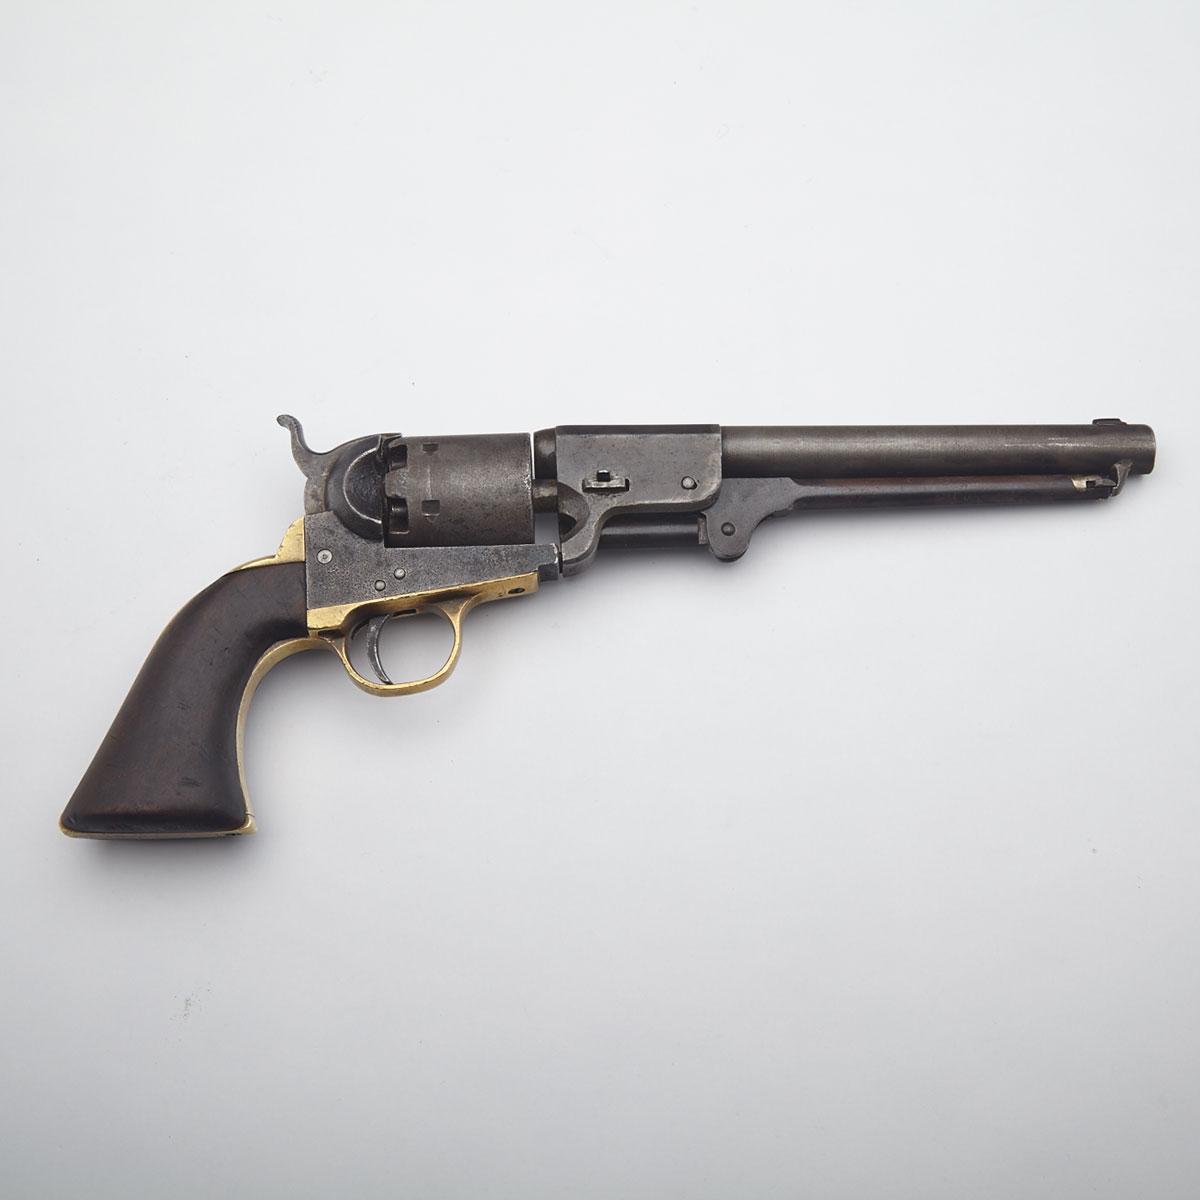 Columbus Fire Arms Manuf. Co. Colt Model 1851 Navy Type Confederate Revolver, 1863-4